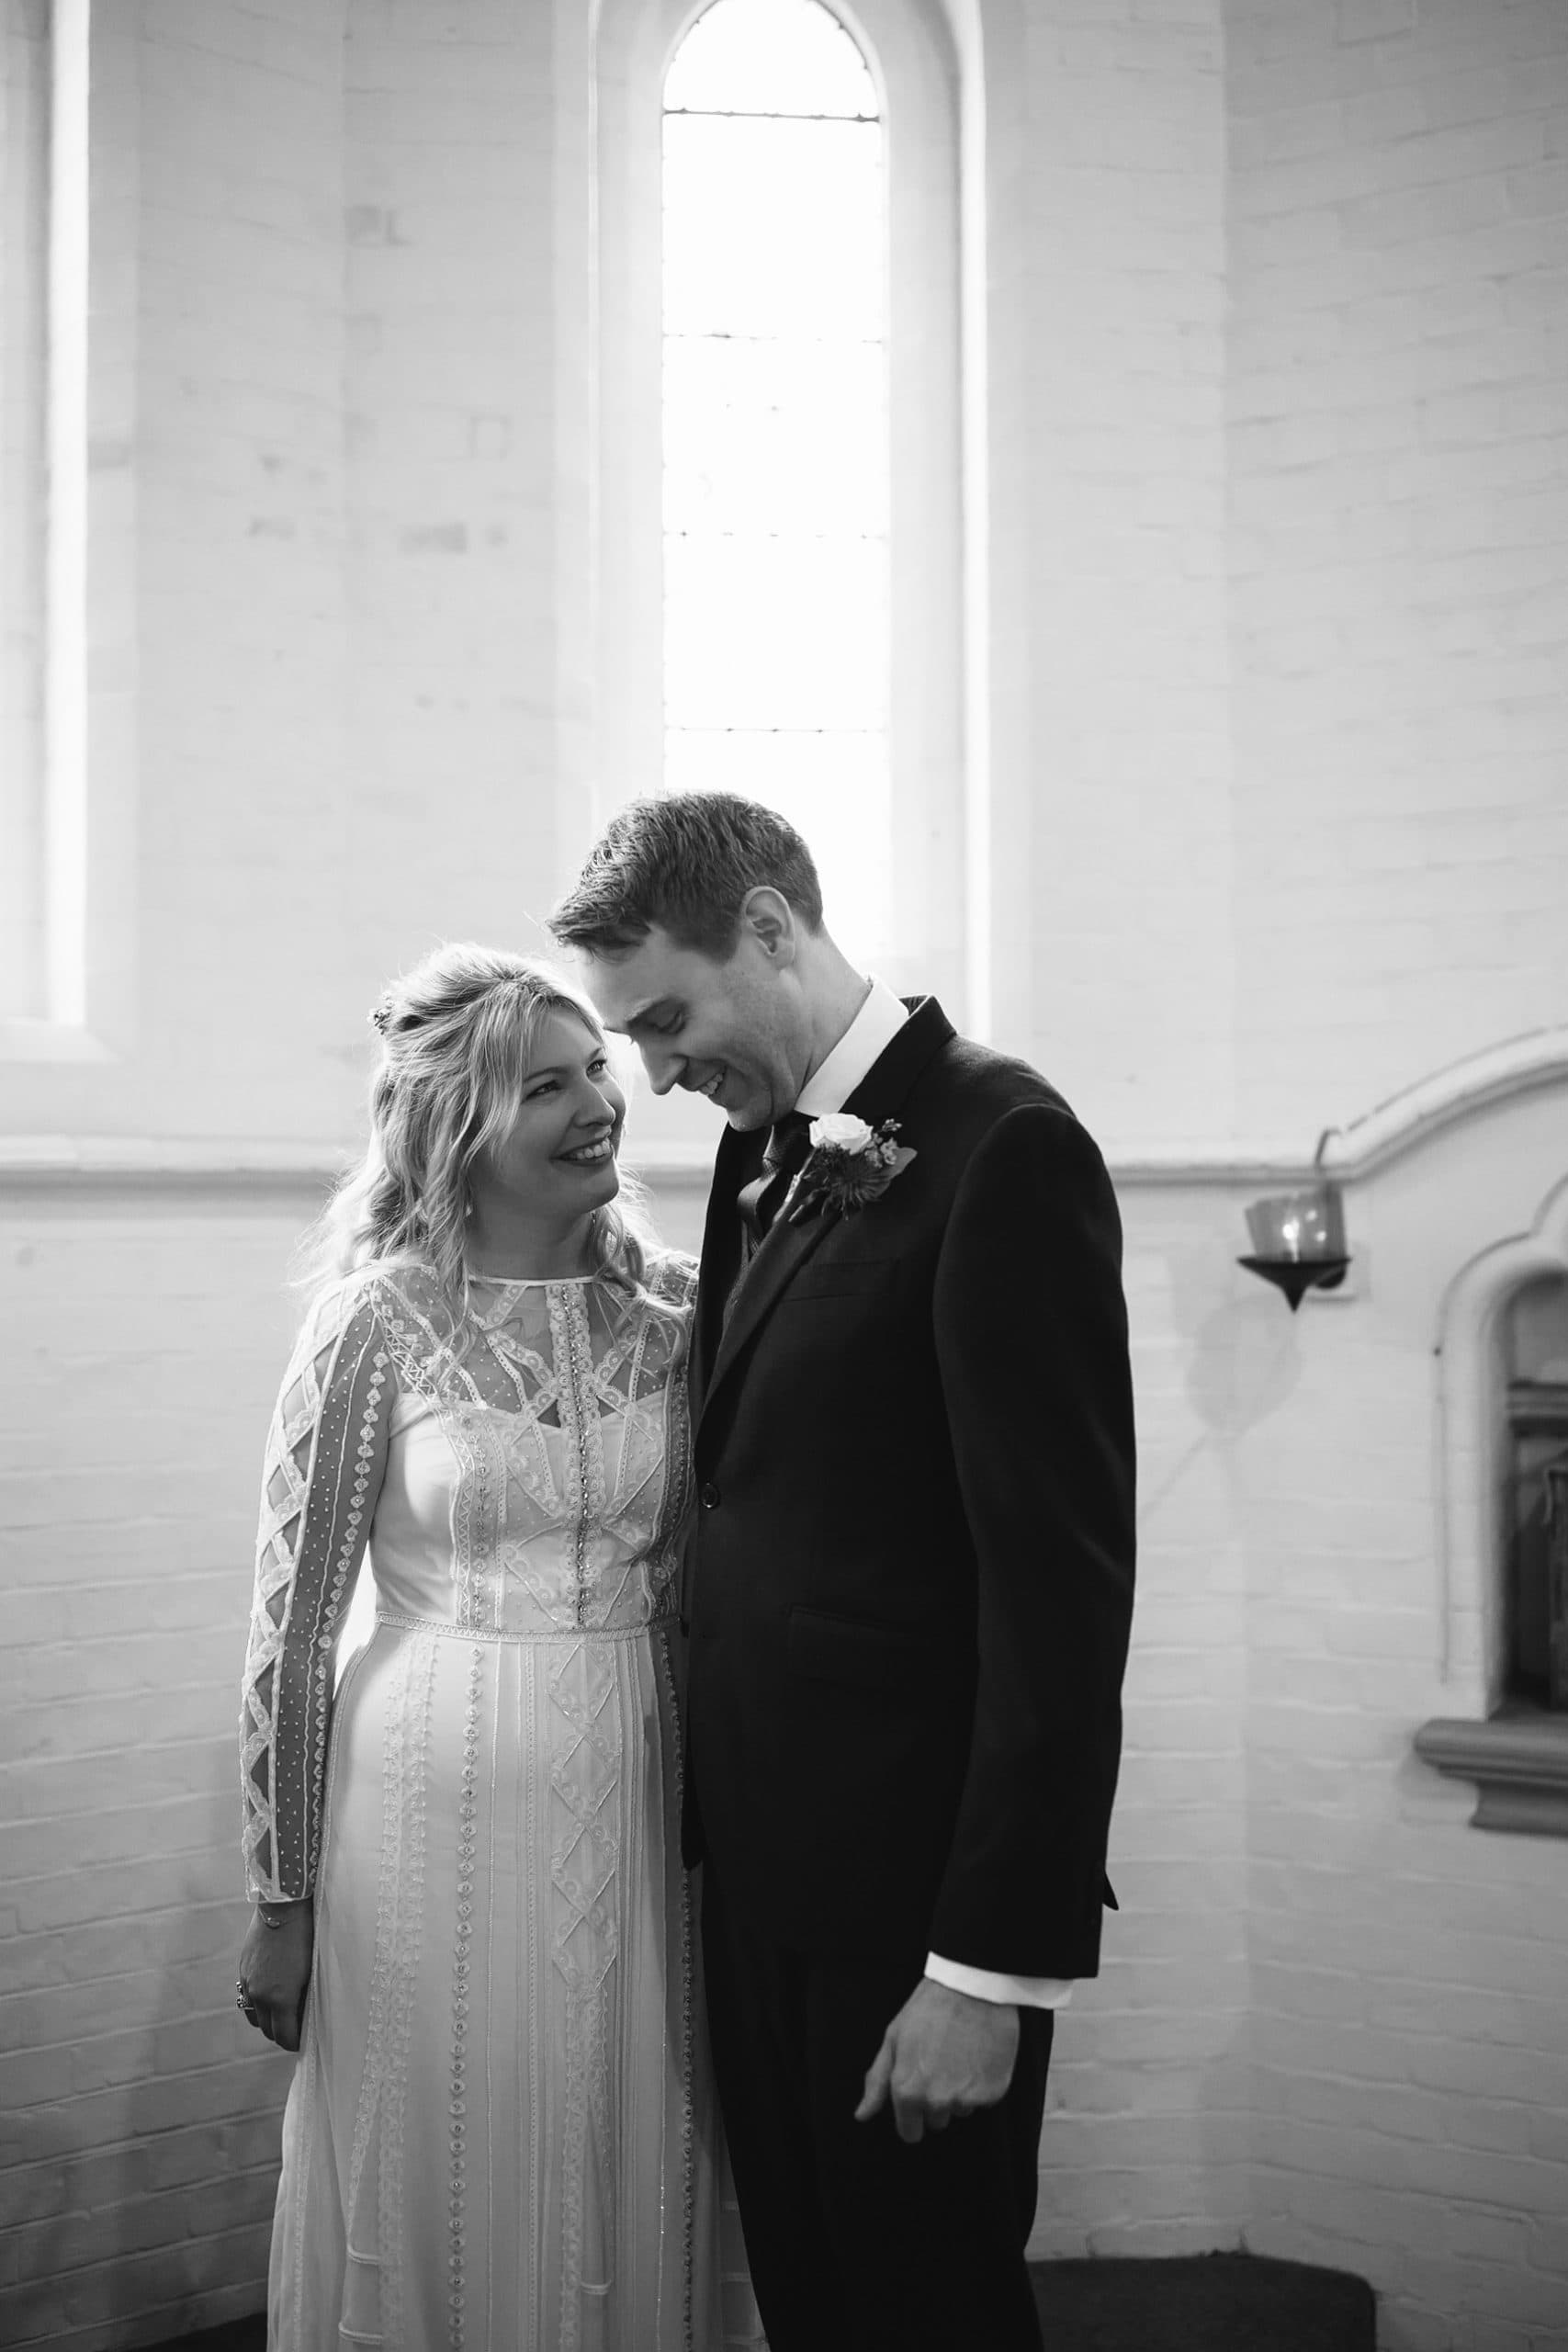 Black and white photo of a bride and groom having a private moment